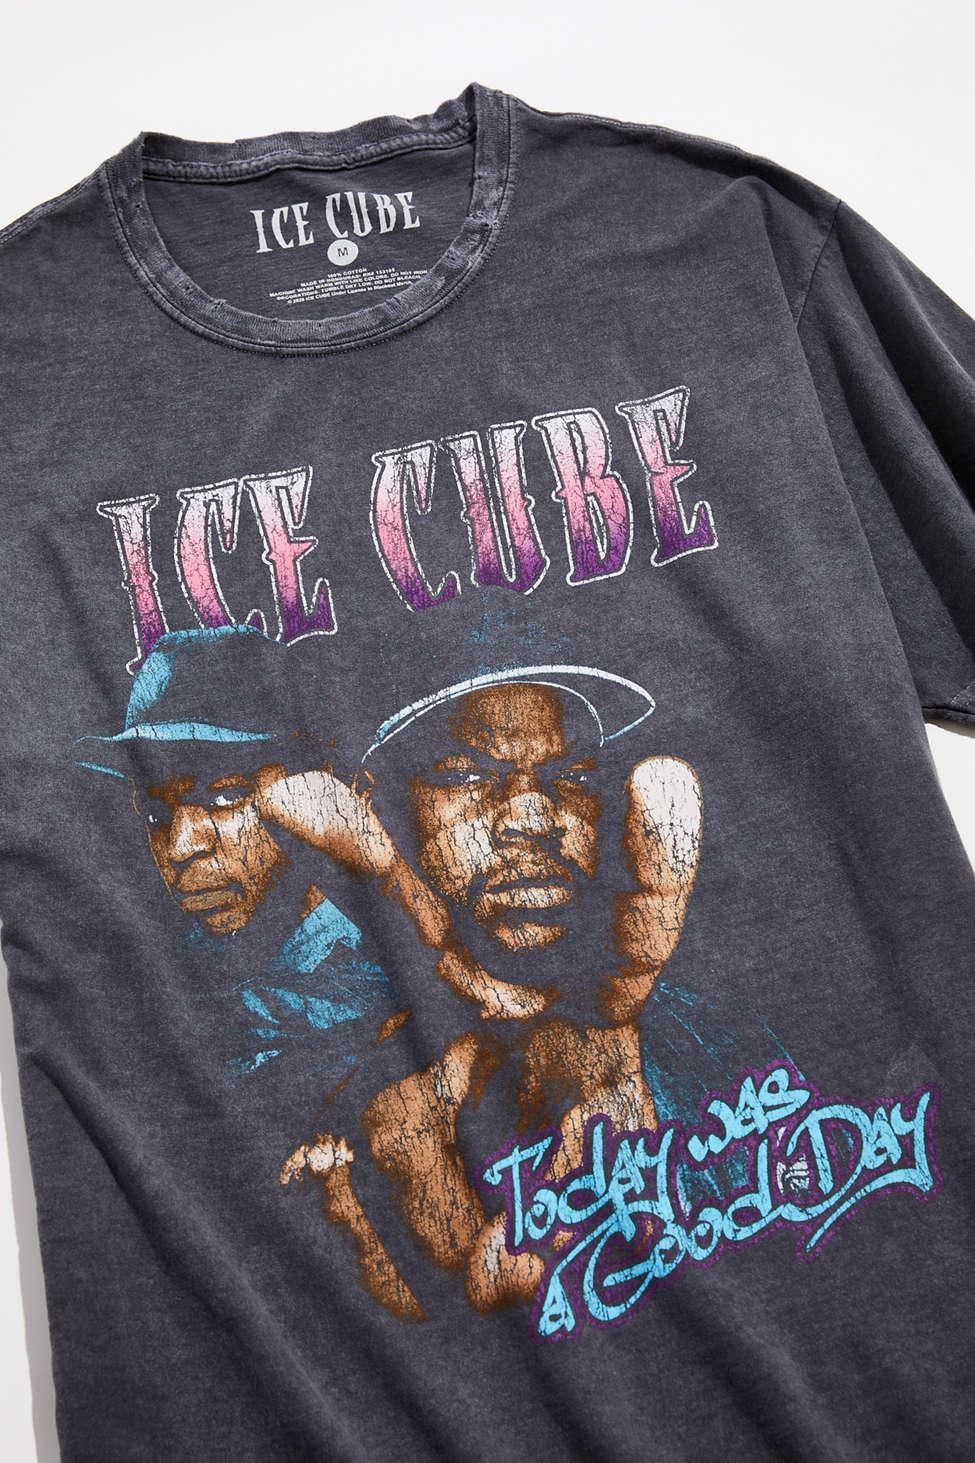 Mini Ice Cube It Was A Good Day Tee - White